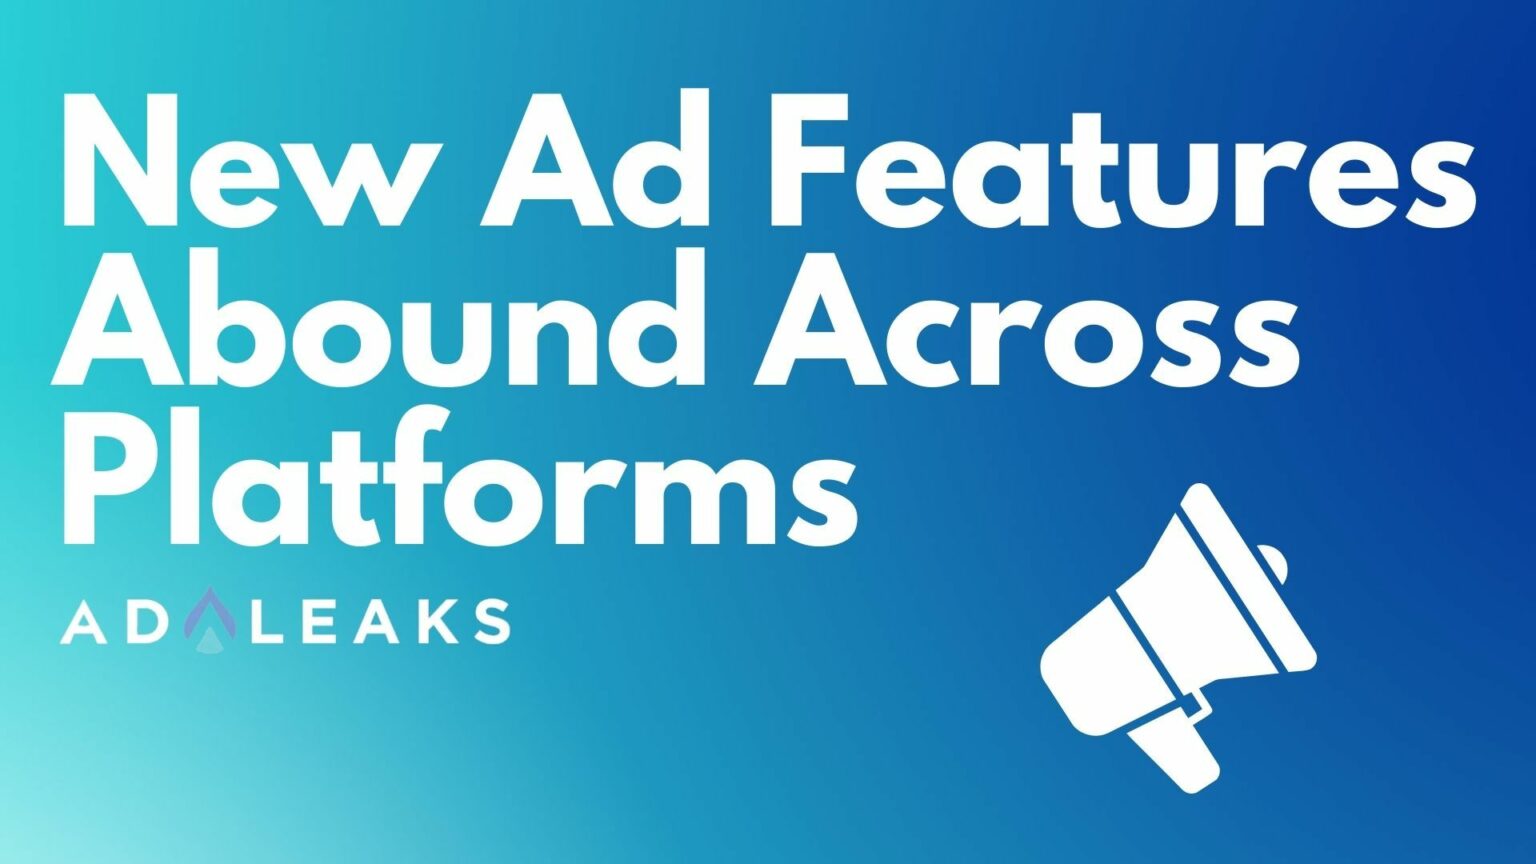 New Ad Features Abound Across Platforms